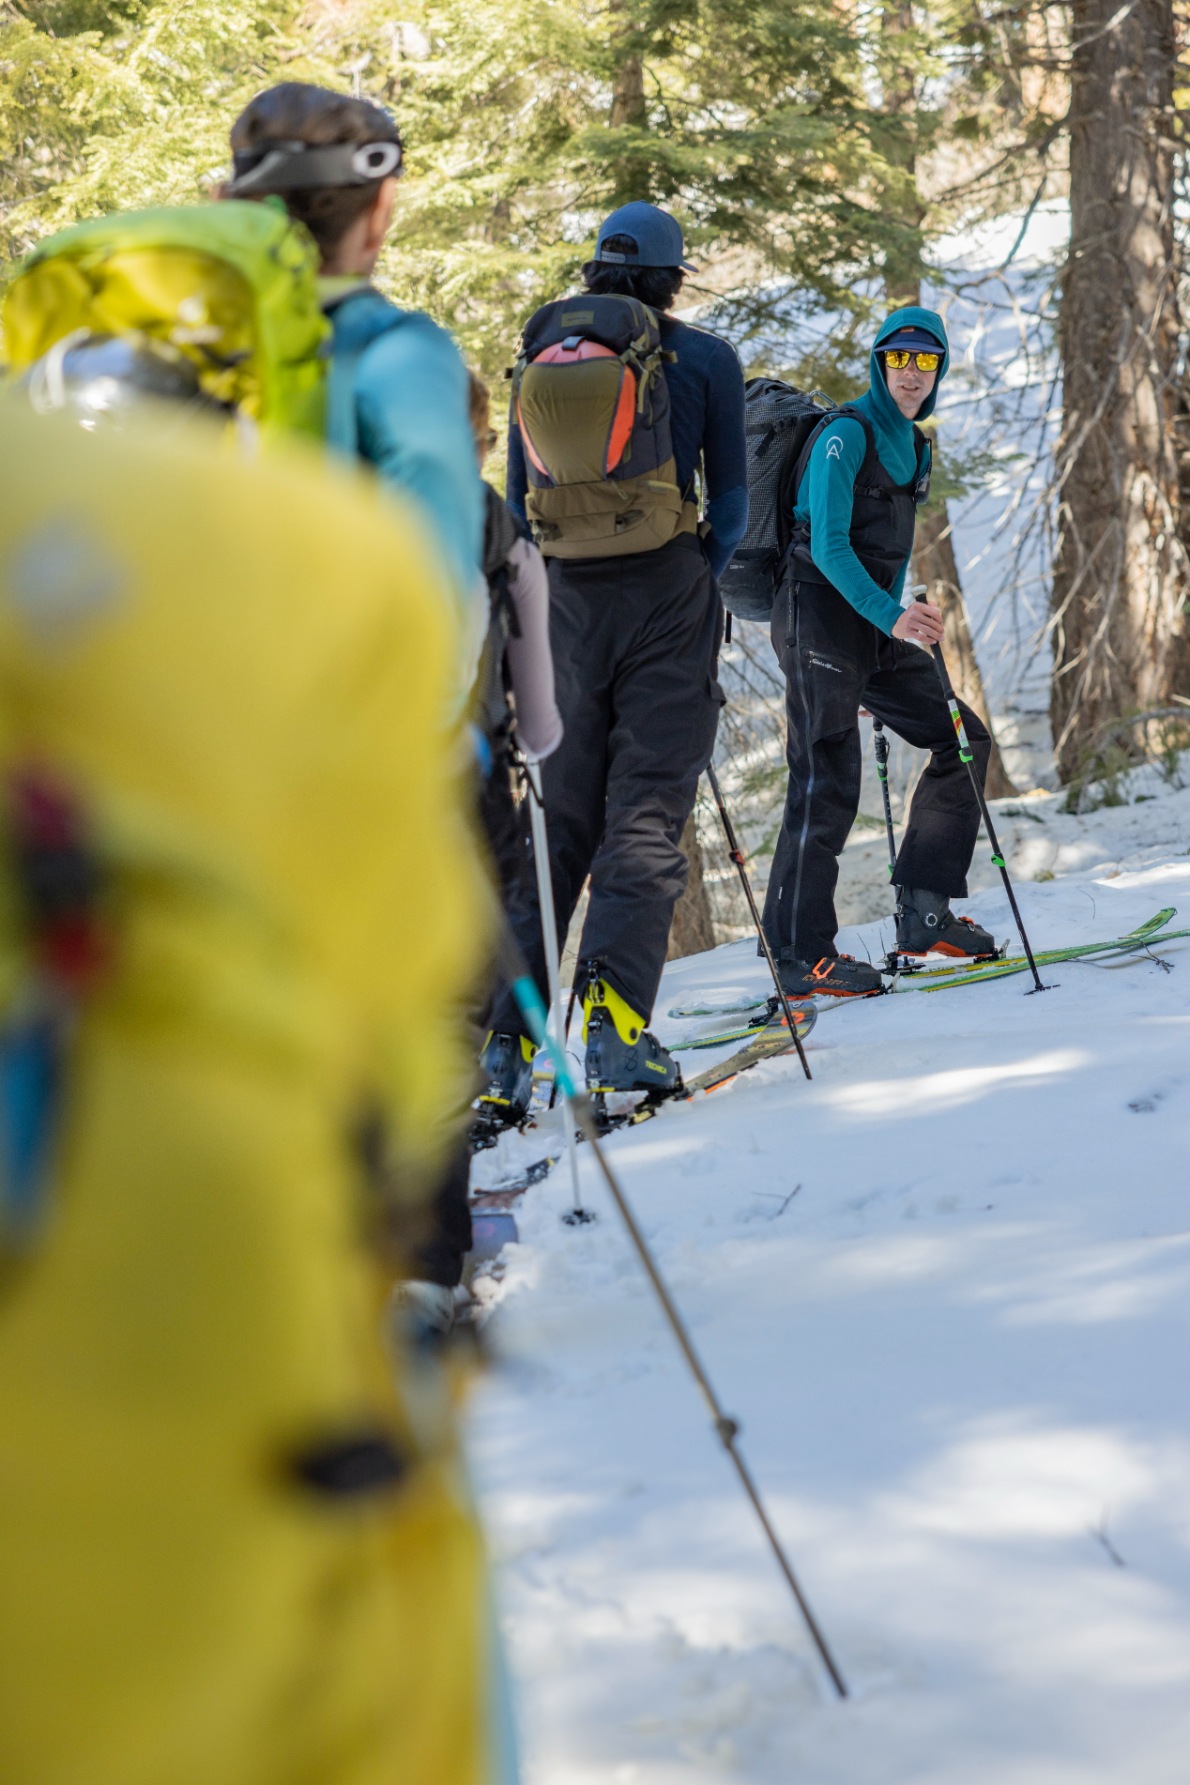 A professional ski guide leads a group of backcountry skiers on an intro to backcountry course in Lake Tahoe